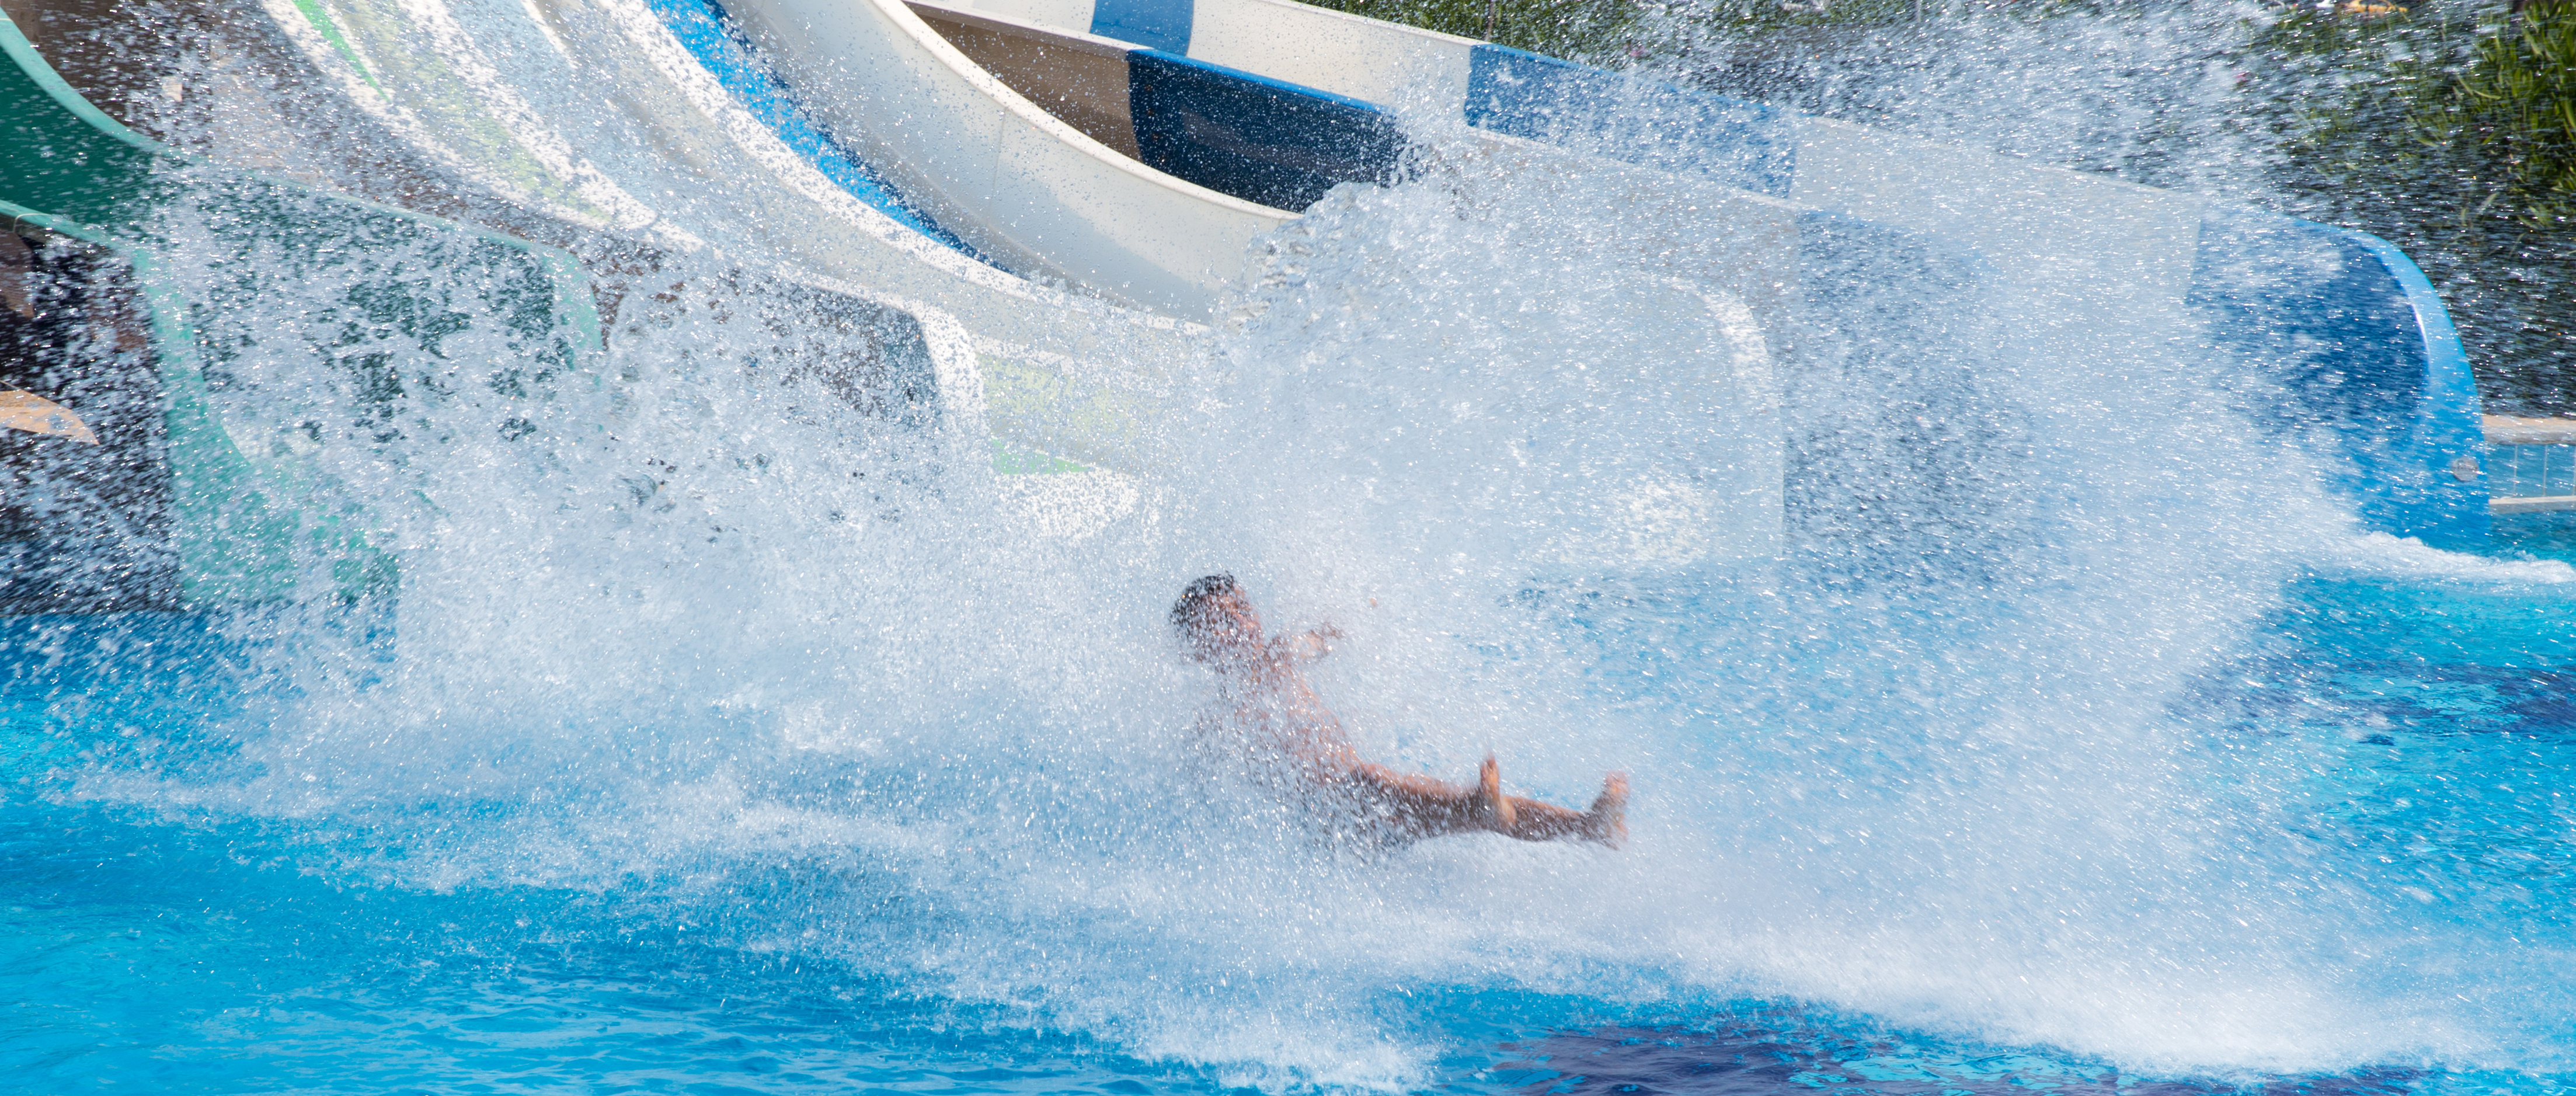 The Markets Corner: Water. A person splashes into the pool at the bottom of a waterslide.